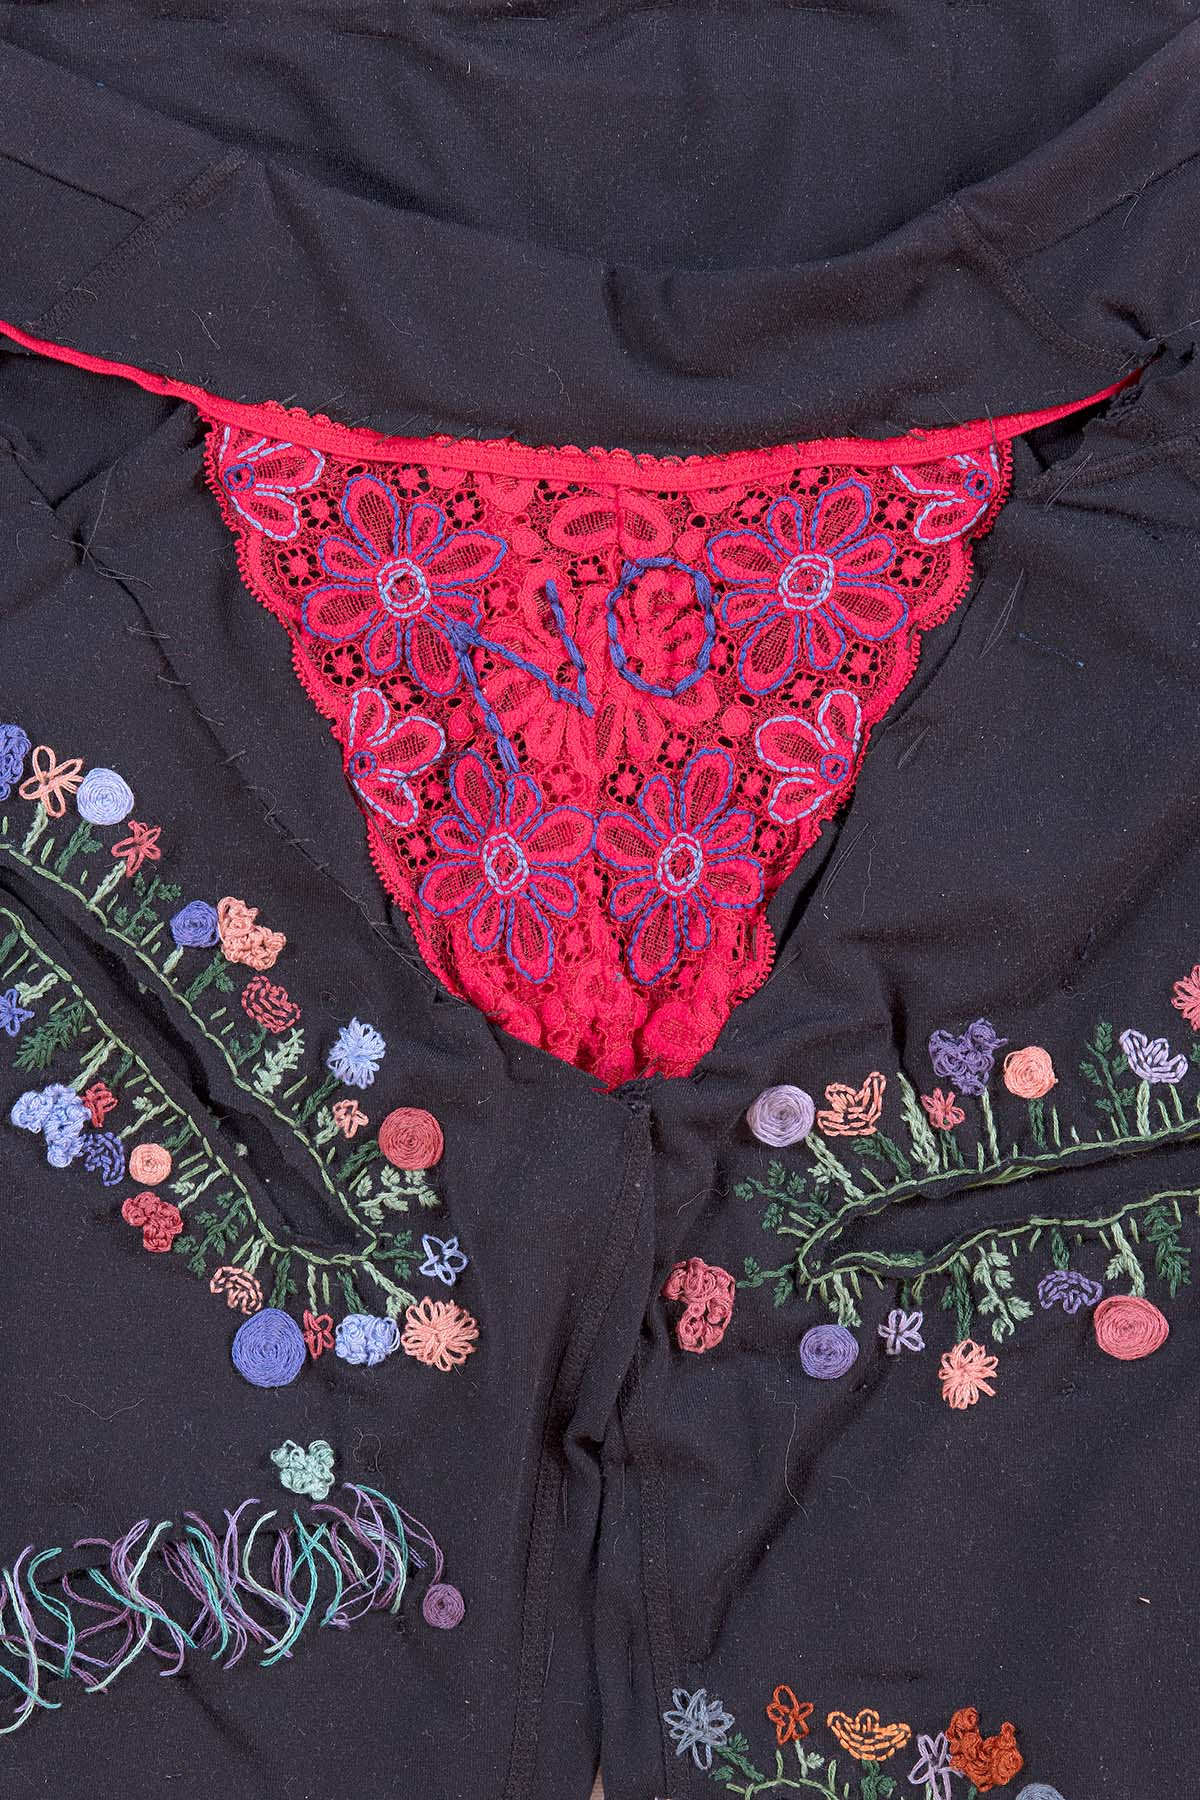 A close-up photograph of a red underwear garment visible atop black pants with the word 'NO' embroidered onto the garment